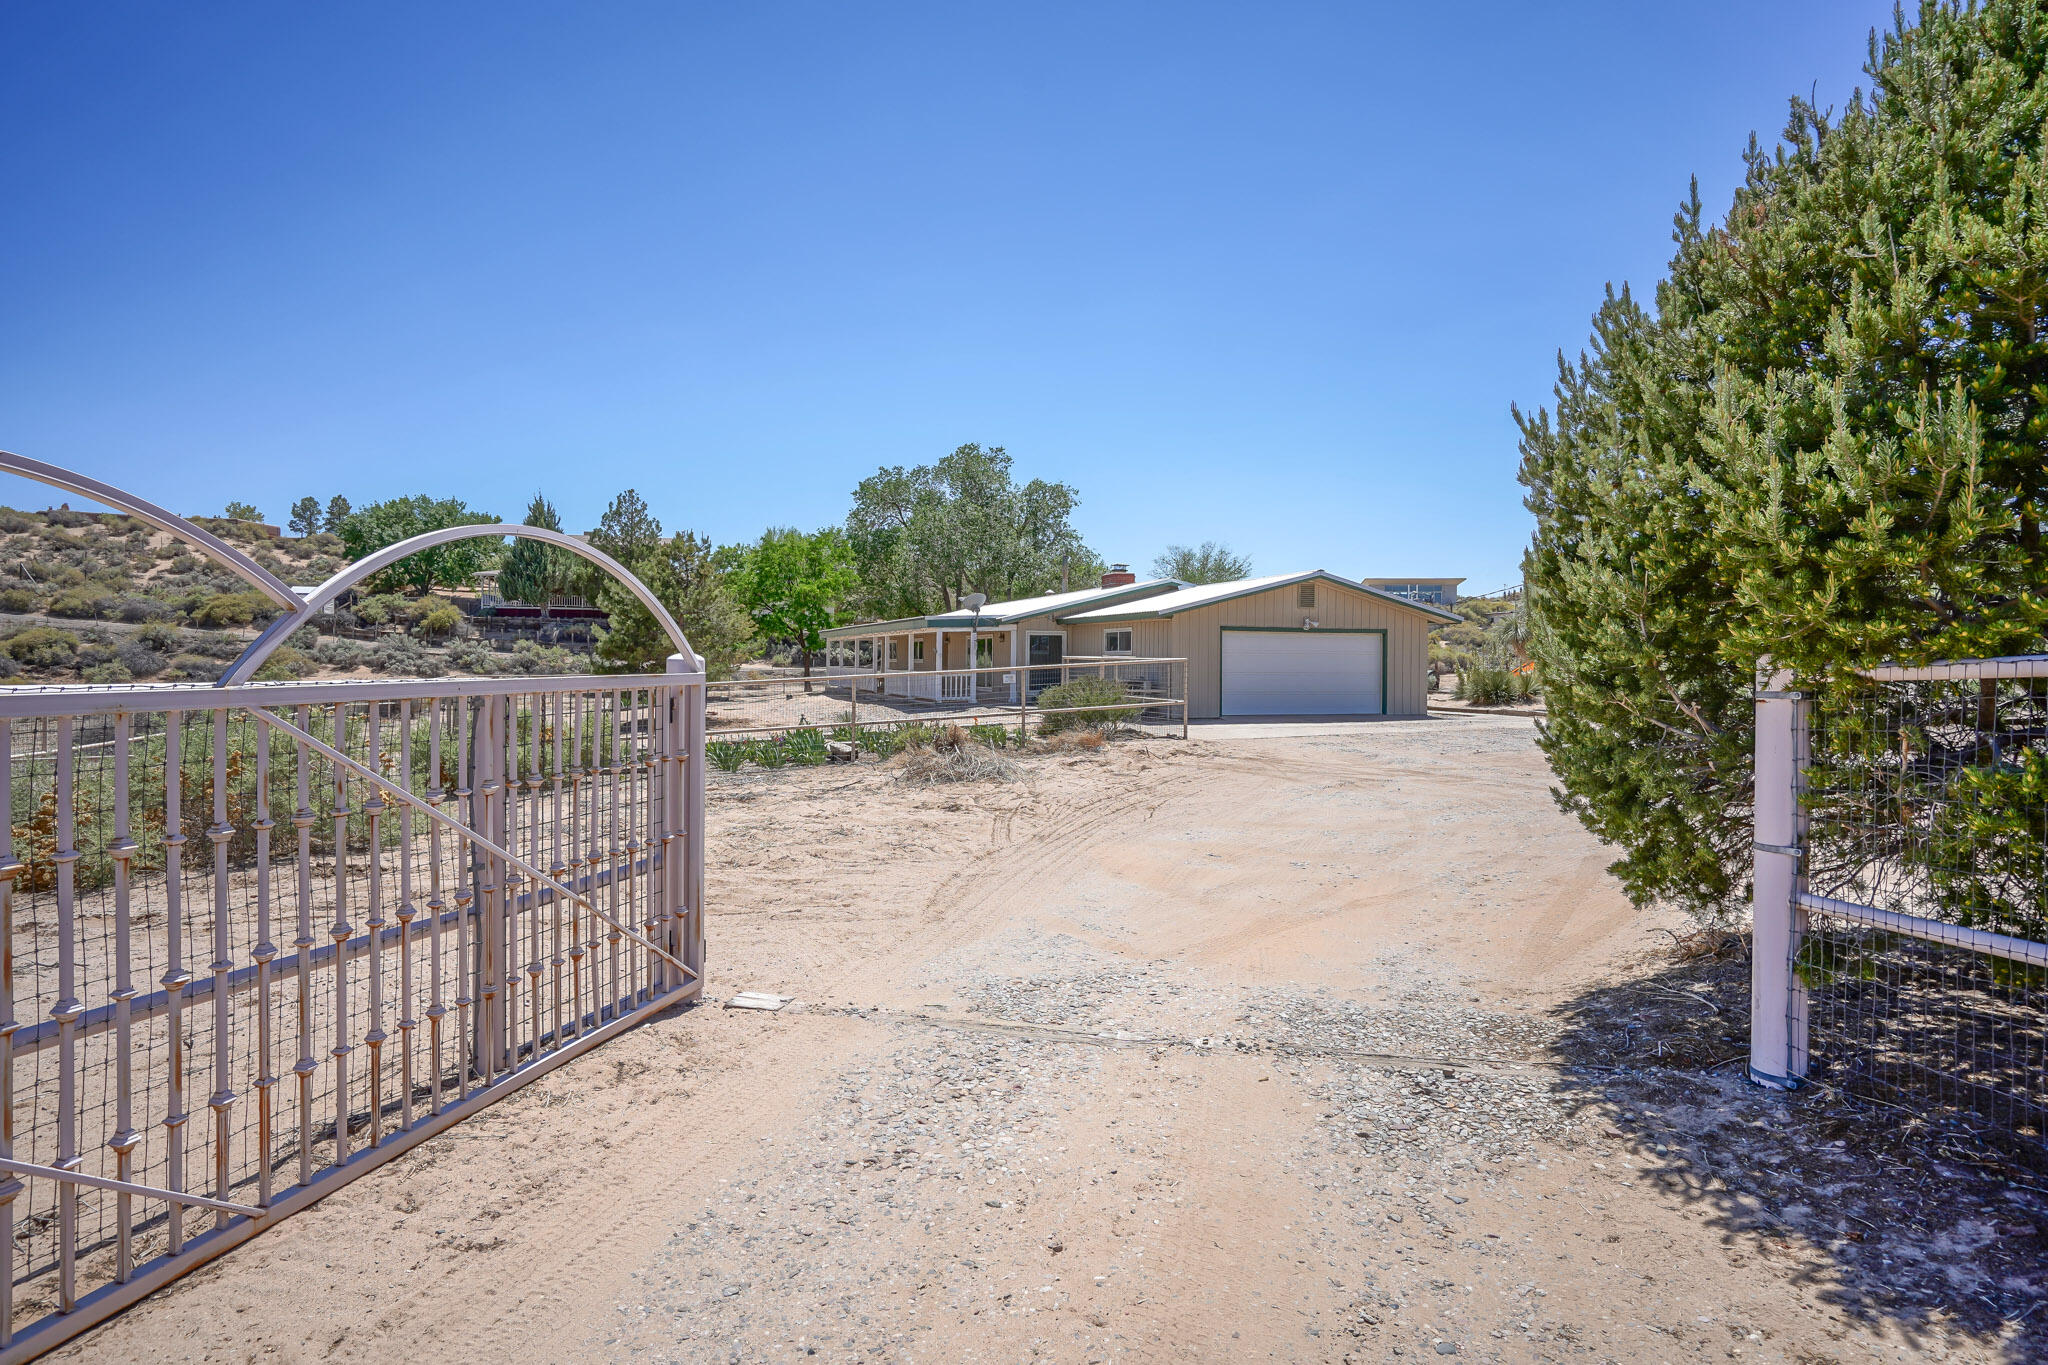 Exceptional opportunity to be a Land Baron in the safest city and horse capital of New Mexico! 3 acres of 'In-town' country in south Corrales with Sandia Mountain views, an 8 Stall Barn, Tack Room, Washing area, Hayport Barn plus separate open air stalls. Spacious level area for an outdoor arena. Site built custom  home features Andersen windows, brick wood burning fireplace in the spacious window laden gathering room, updated country kitchen, a wide front 'sitting' porch to relax upon and enjoy the views! Miles of idyllic horse trails begin at Coronado & Loma Larga just down the hill. 5 min to Cottonwood Mall; 25 min to Airport. Preference given to buyers who wish to purchase the entire 3 acres together.There is potential option of purchasing acres separately